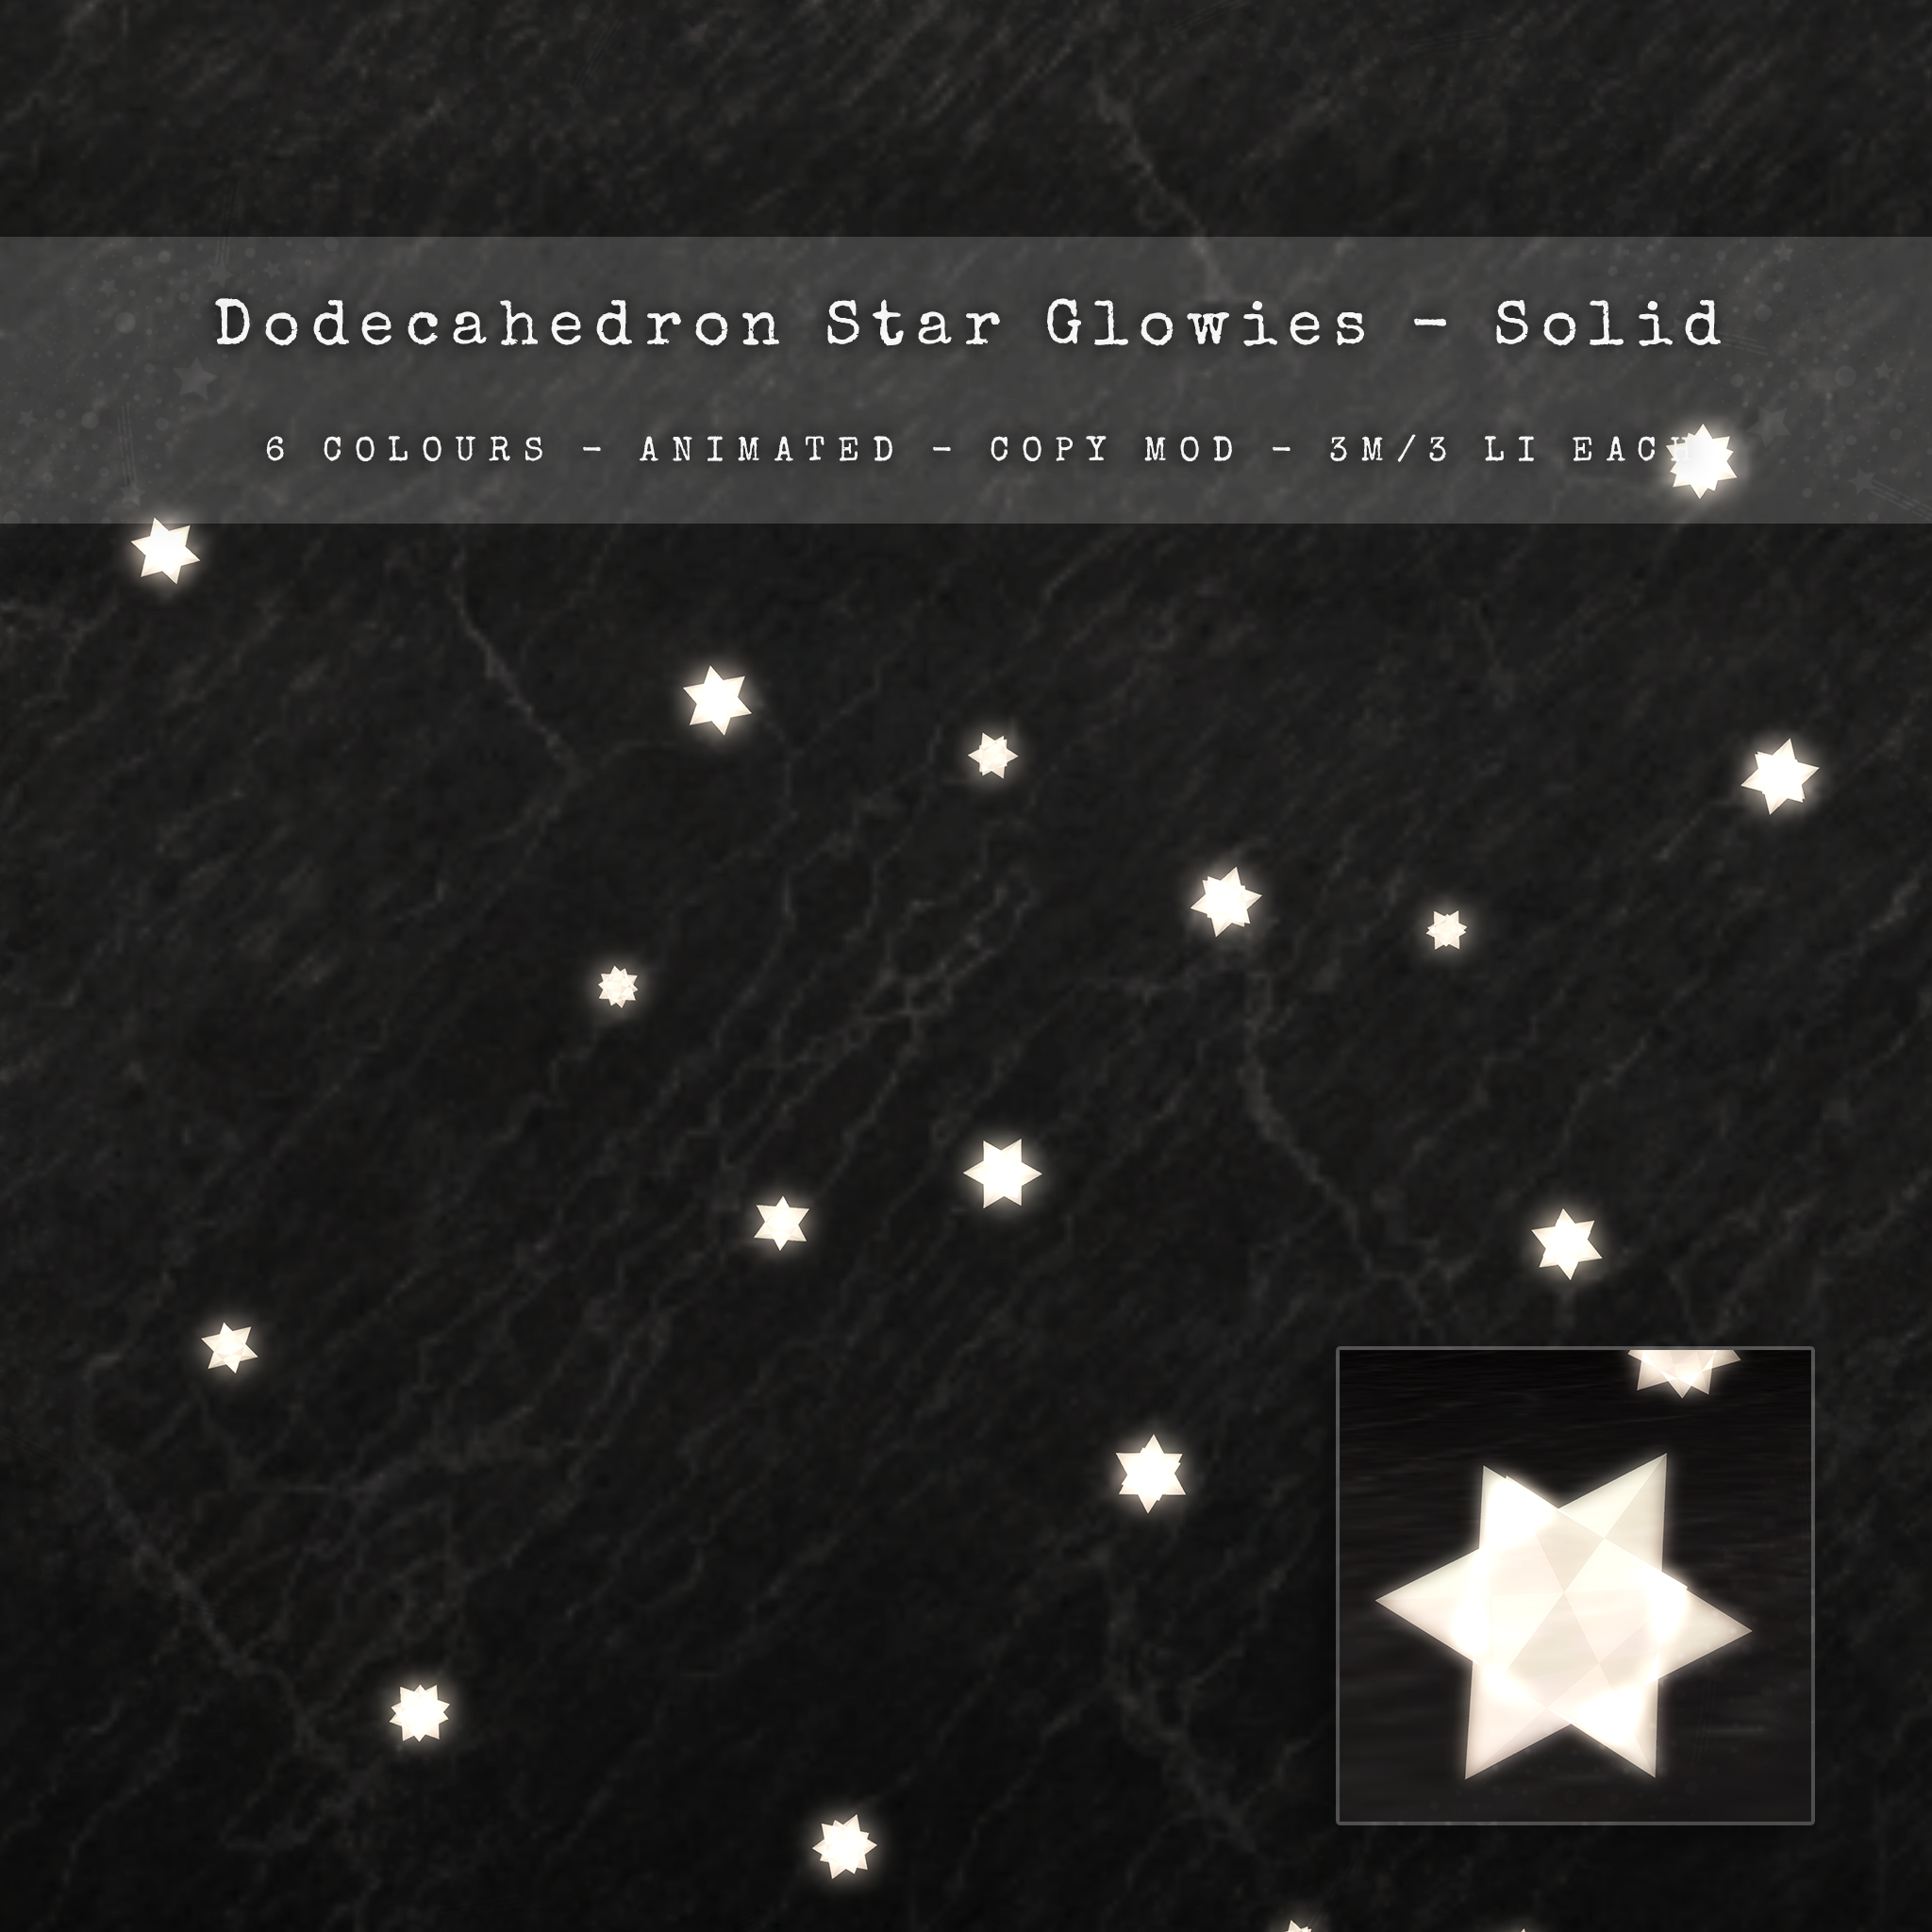 Celeste – Dodecahedron Star Glowies